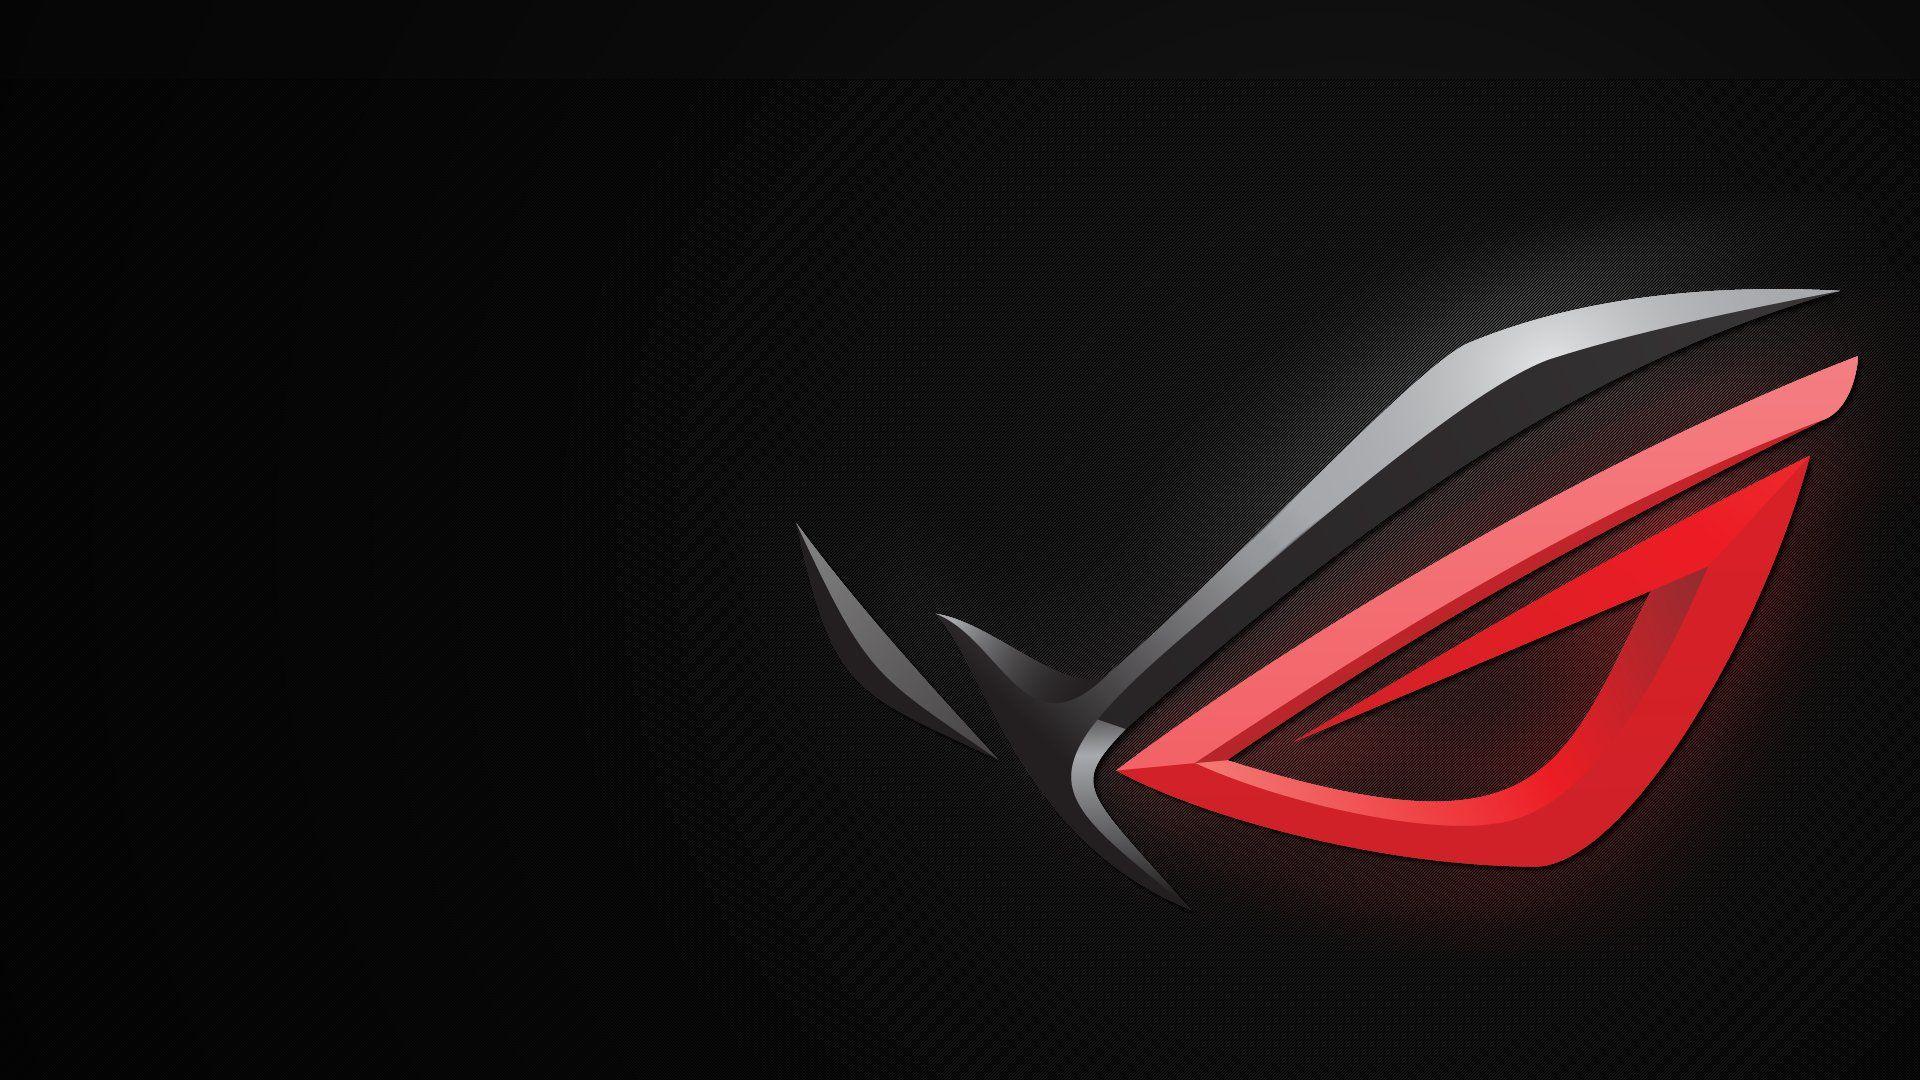 Asus Wallpapers - Top Free Asus Backgrounds - Wallpaperaccess